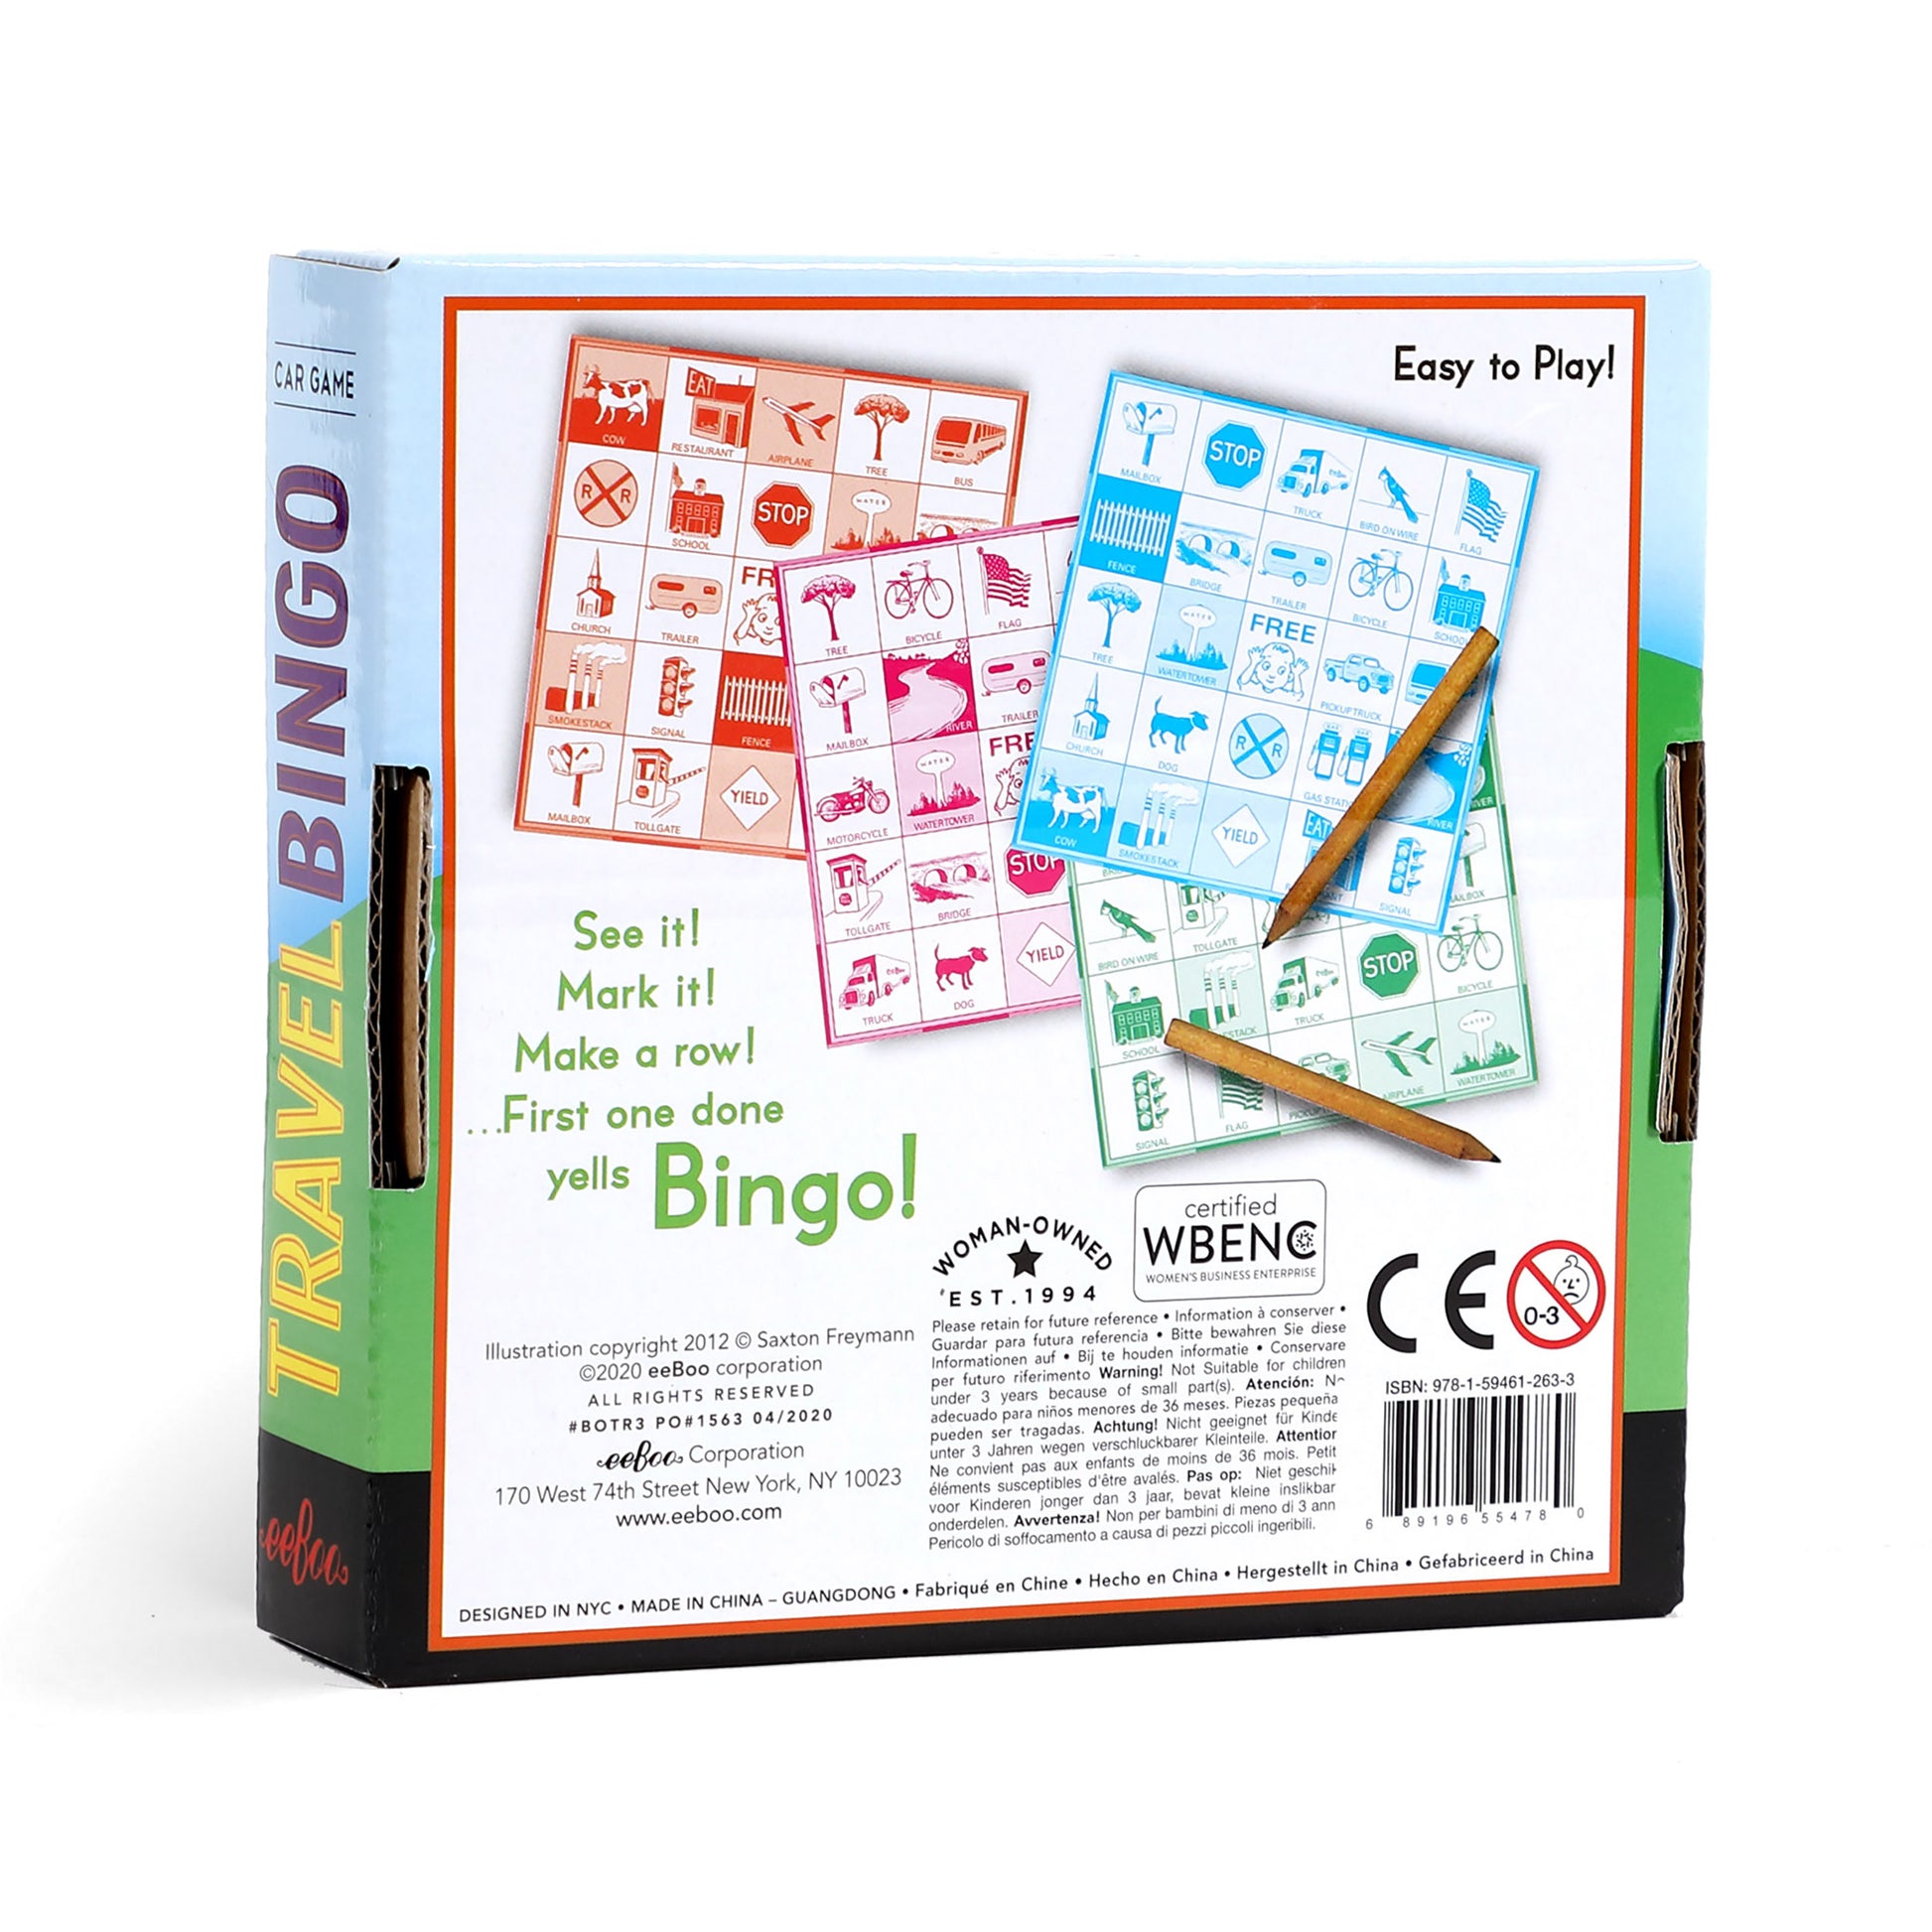 Classic Travel Bingo Game for Car Trips eeBoo for Kids Ages 4+